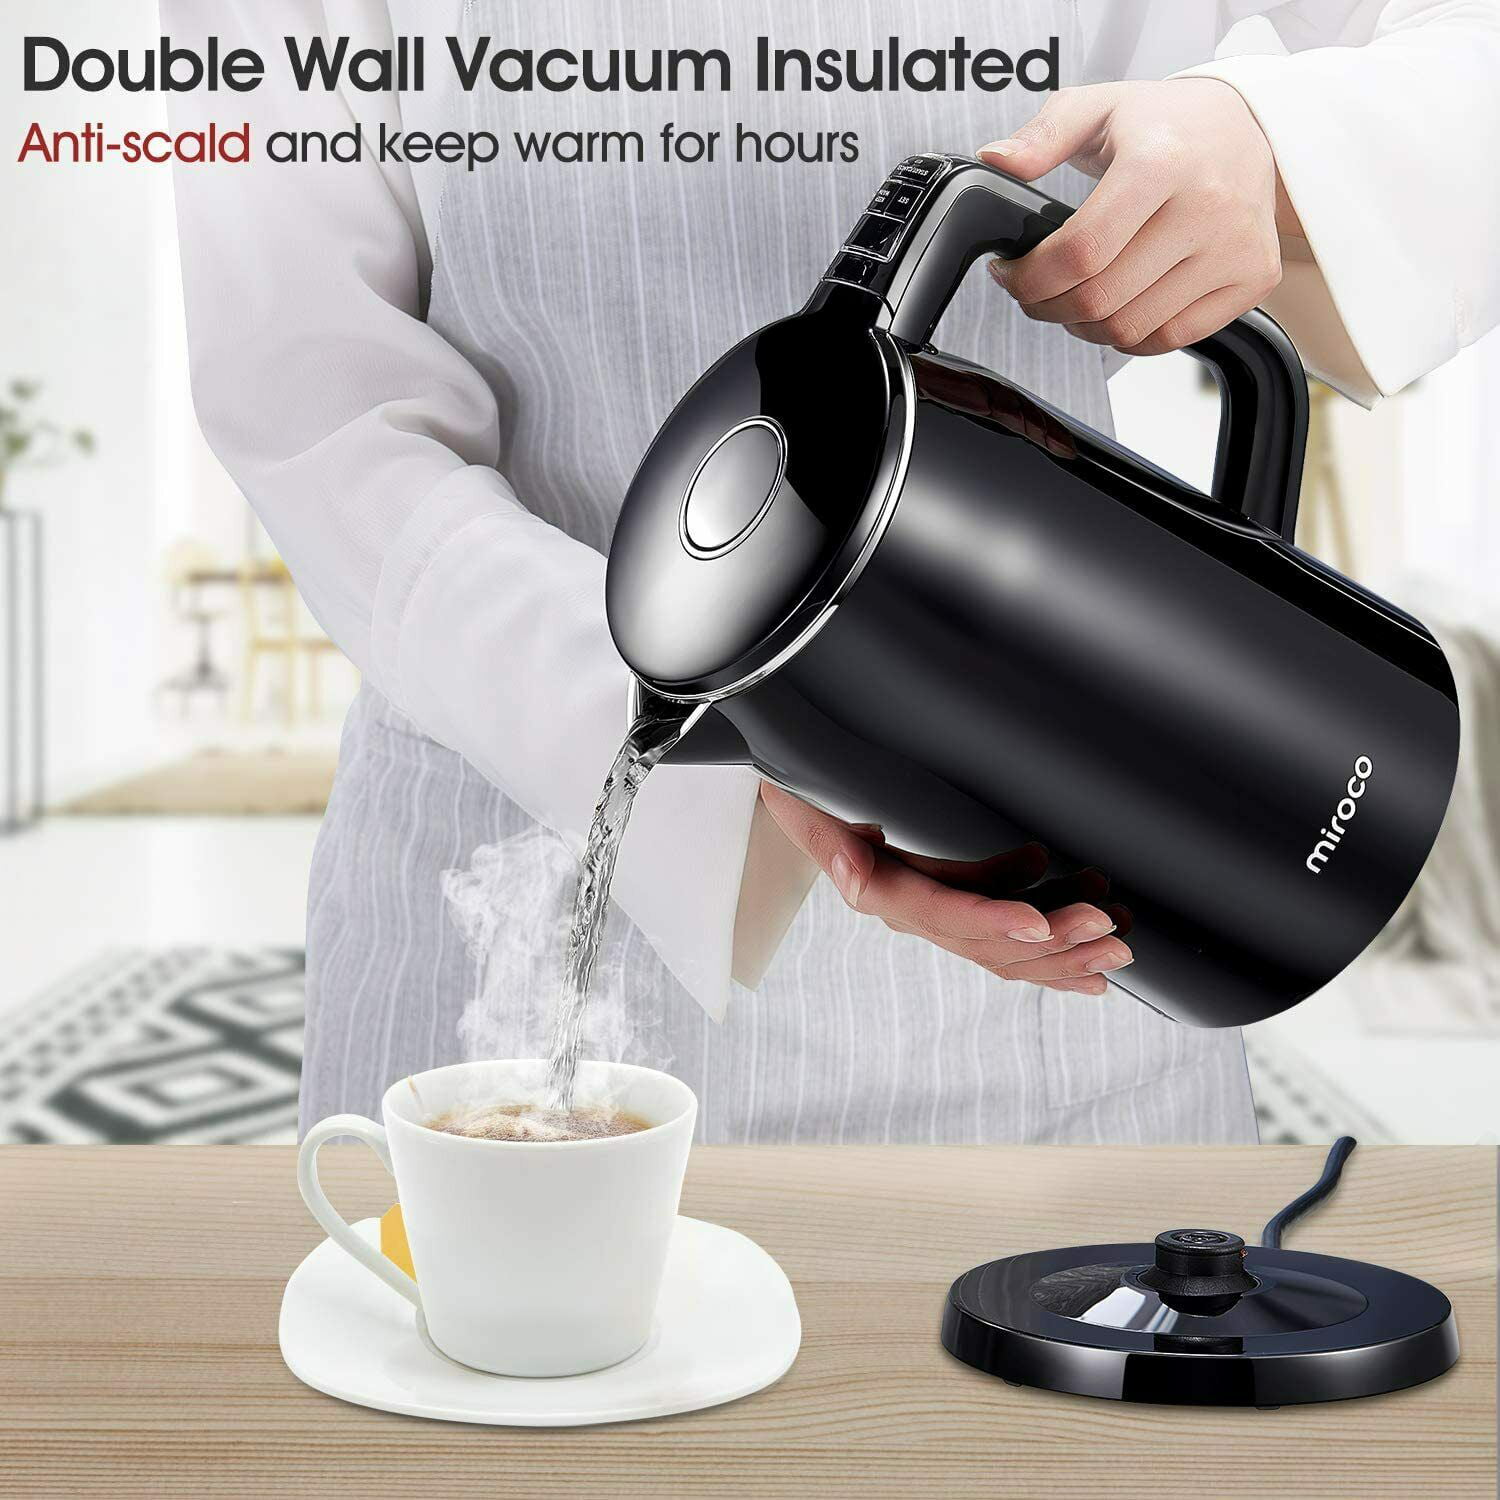 Electric Kettle, Miroco Double Wall 100% Stainless Steel Cool Touch Tea Kettle